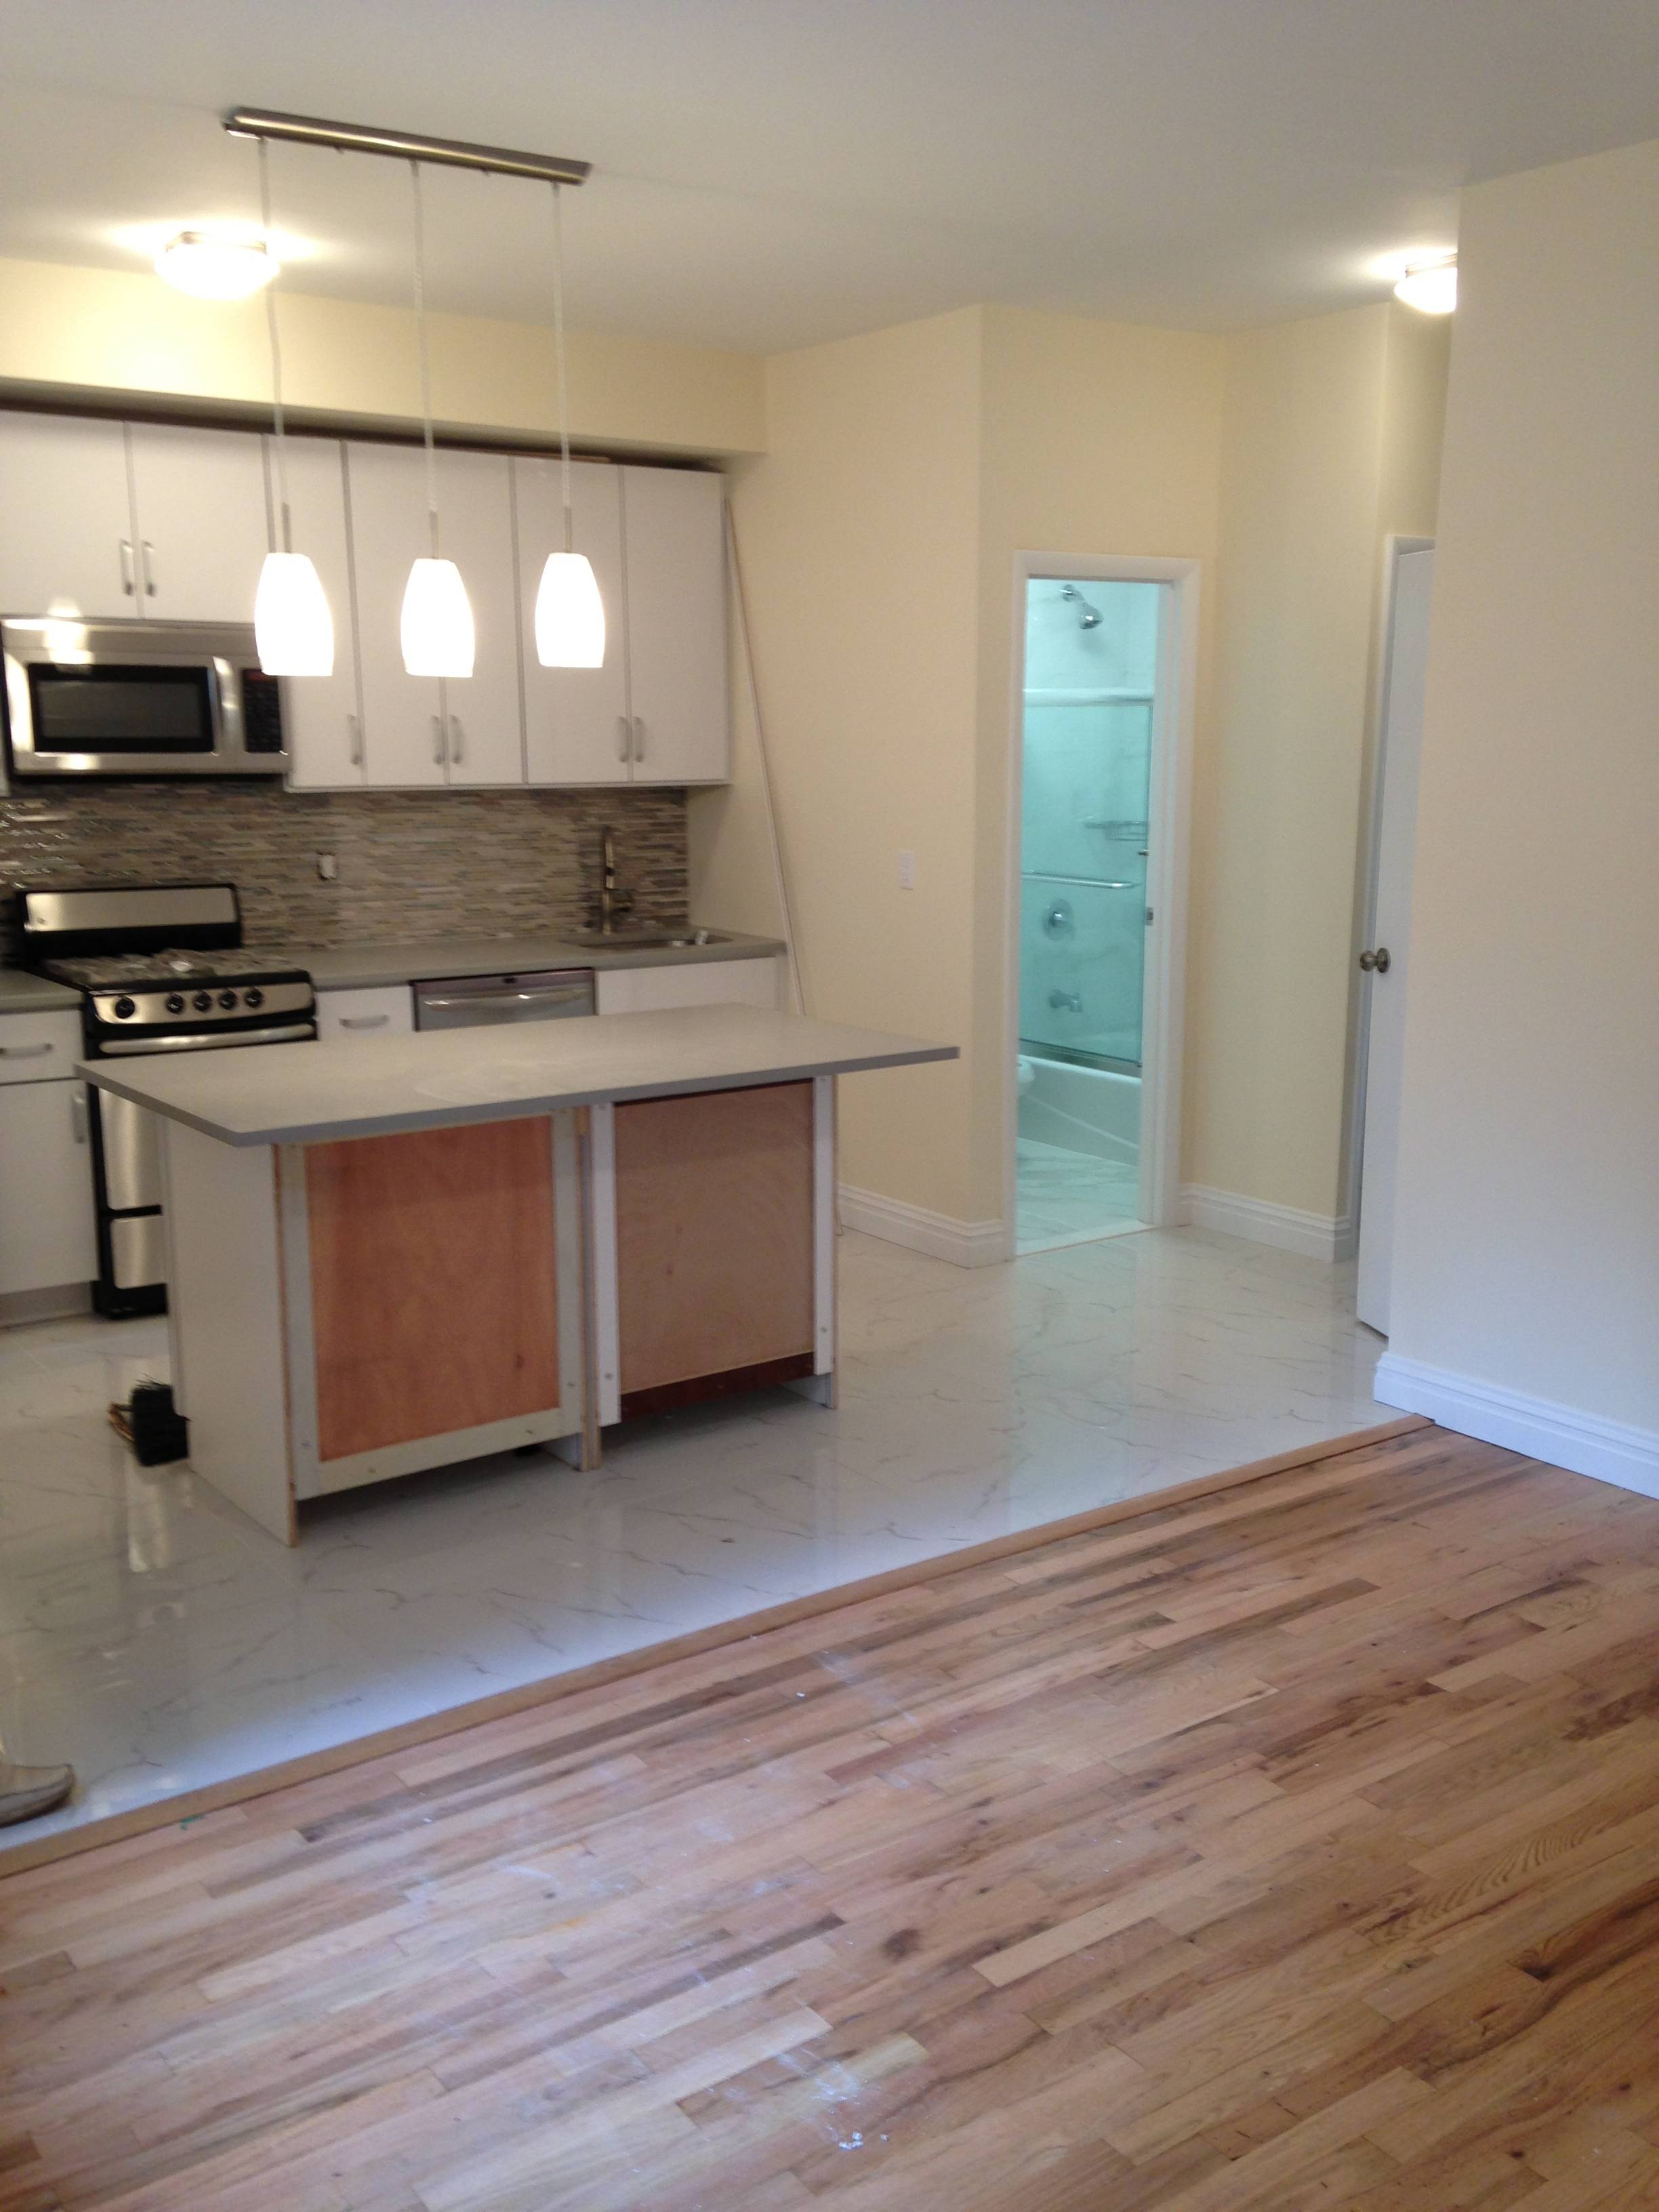 Astoria, Queens NY, 2 BR, $2500 Newly Renovated! Act Quick!